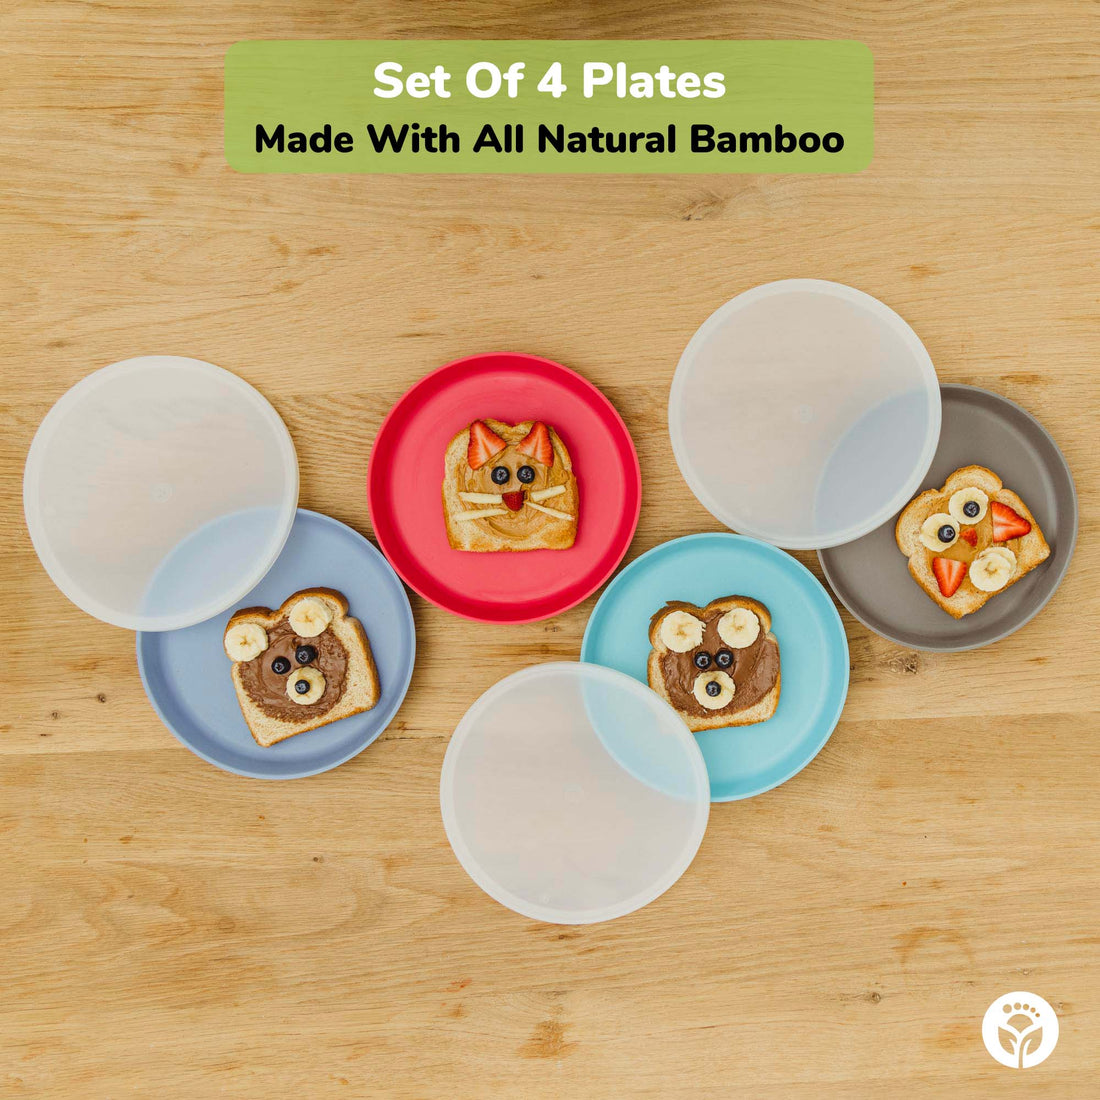 WeeSprout Divided Bamboo Plates for Kids, Kids Plates Made with Food Grade Natural Bamboo, Divided Design for Picky Eaters, Kid-Sized Reusable